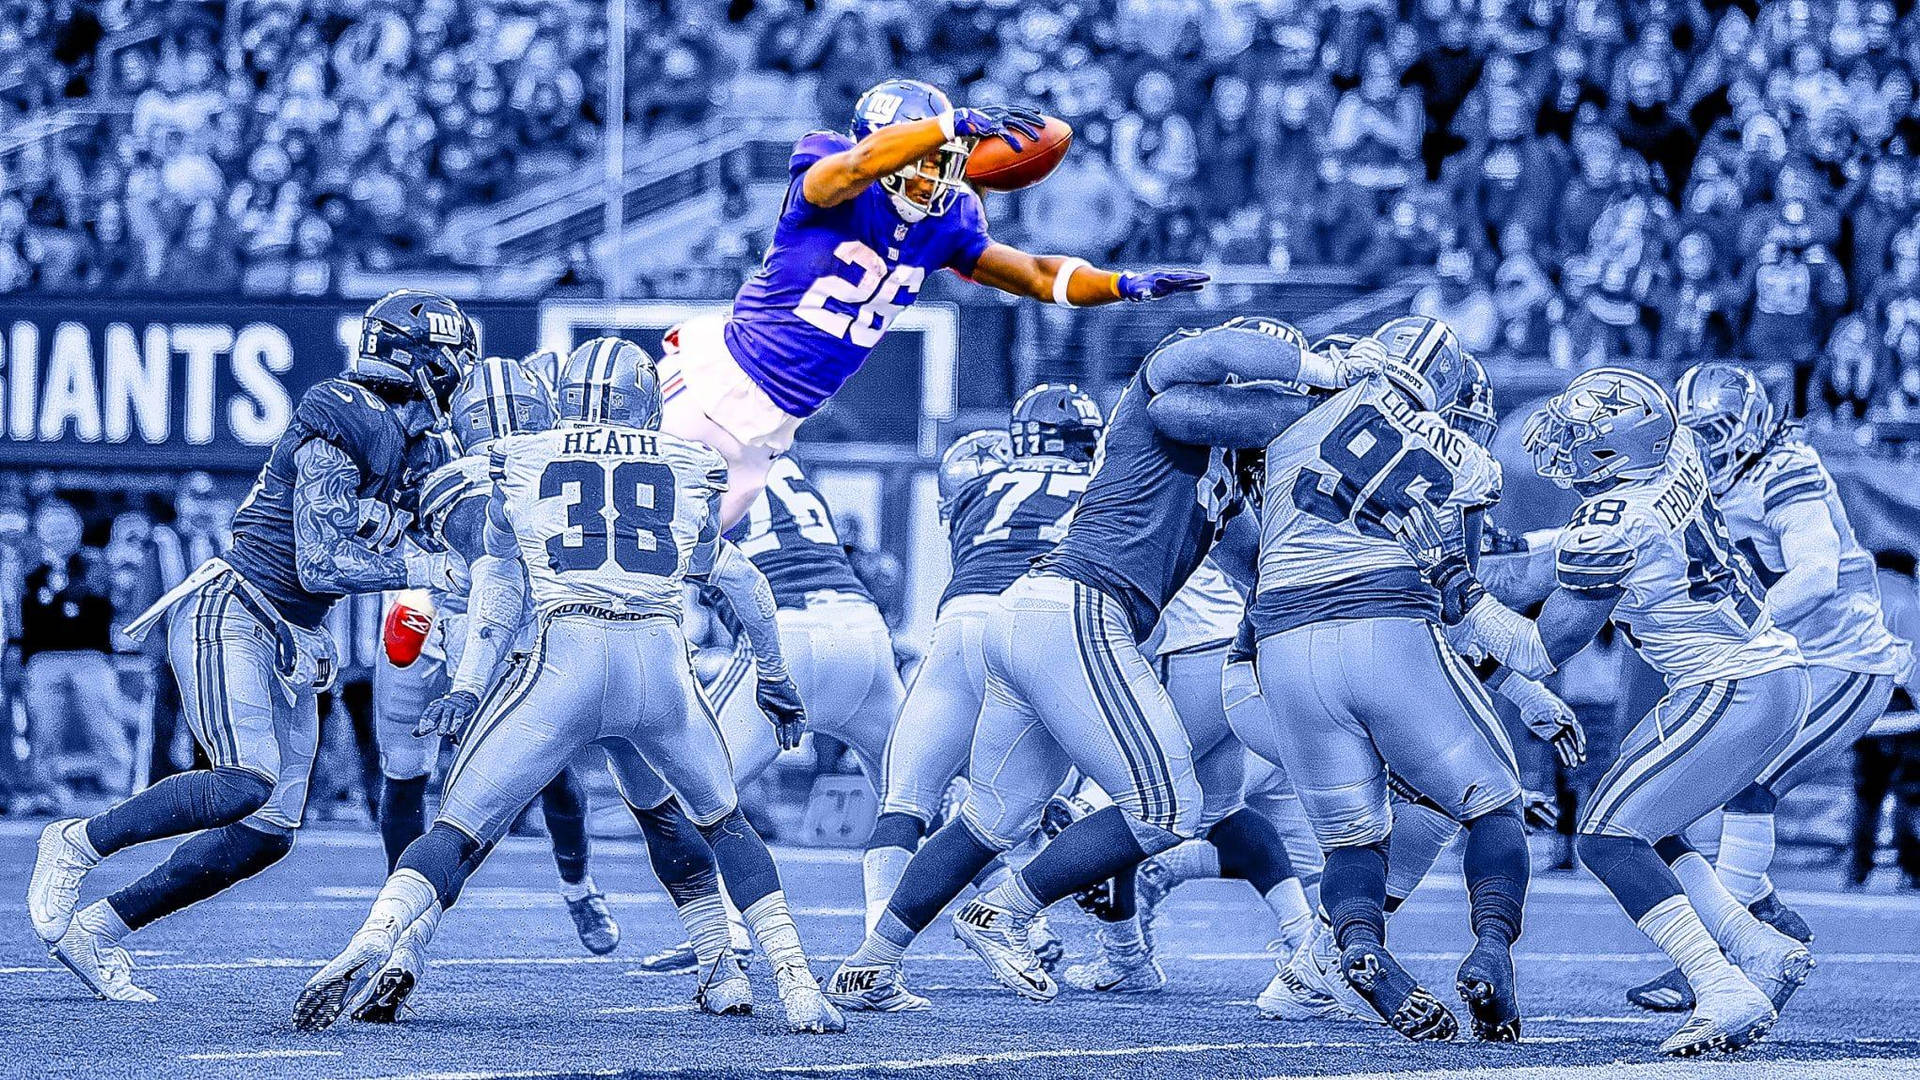 Download New York Giants Running Back Saquon Barkley Carrying the